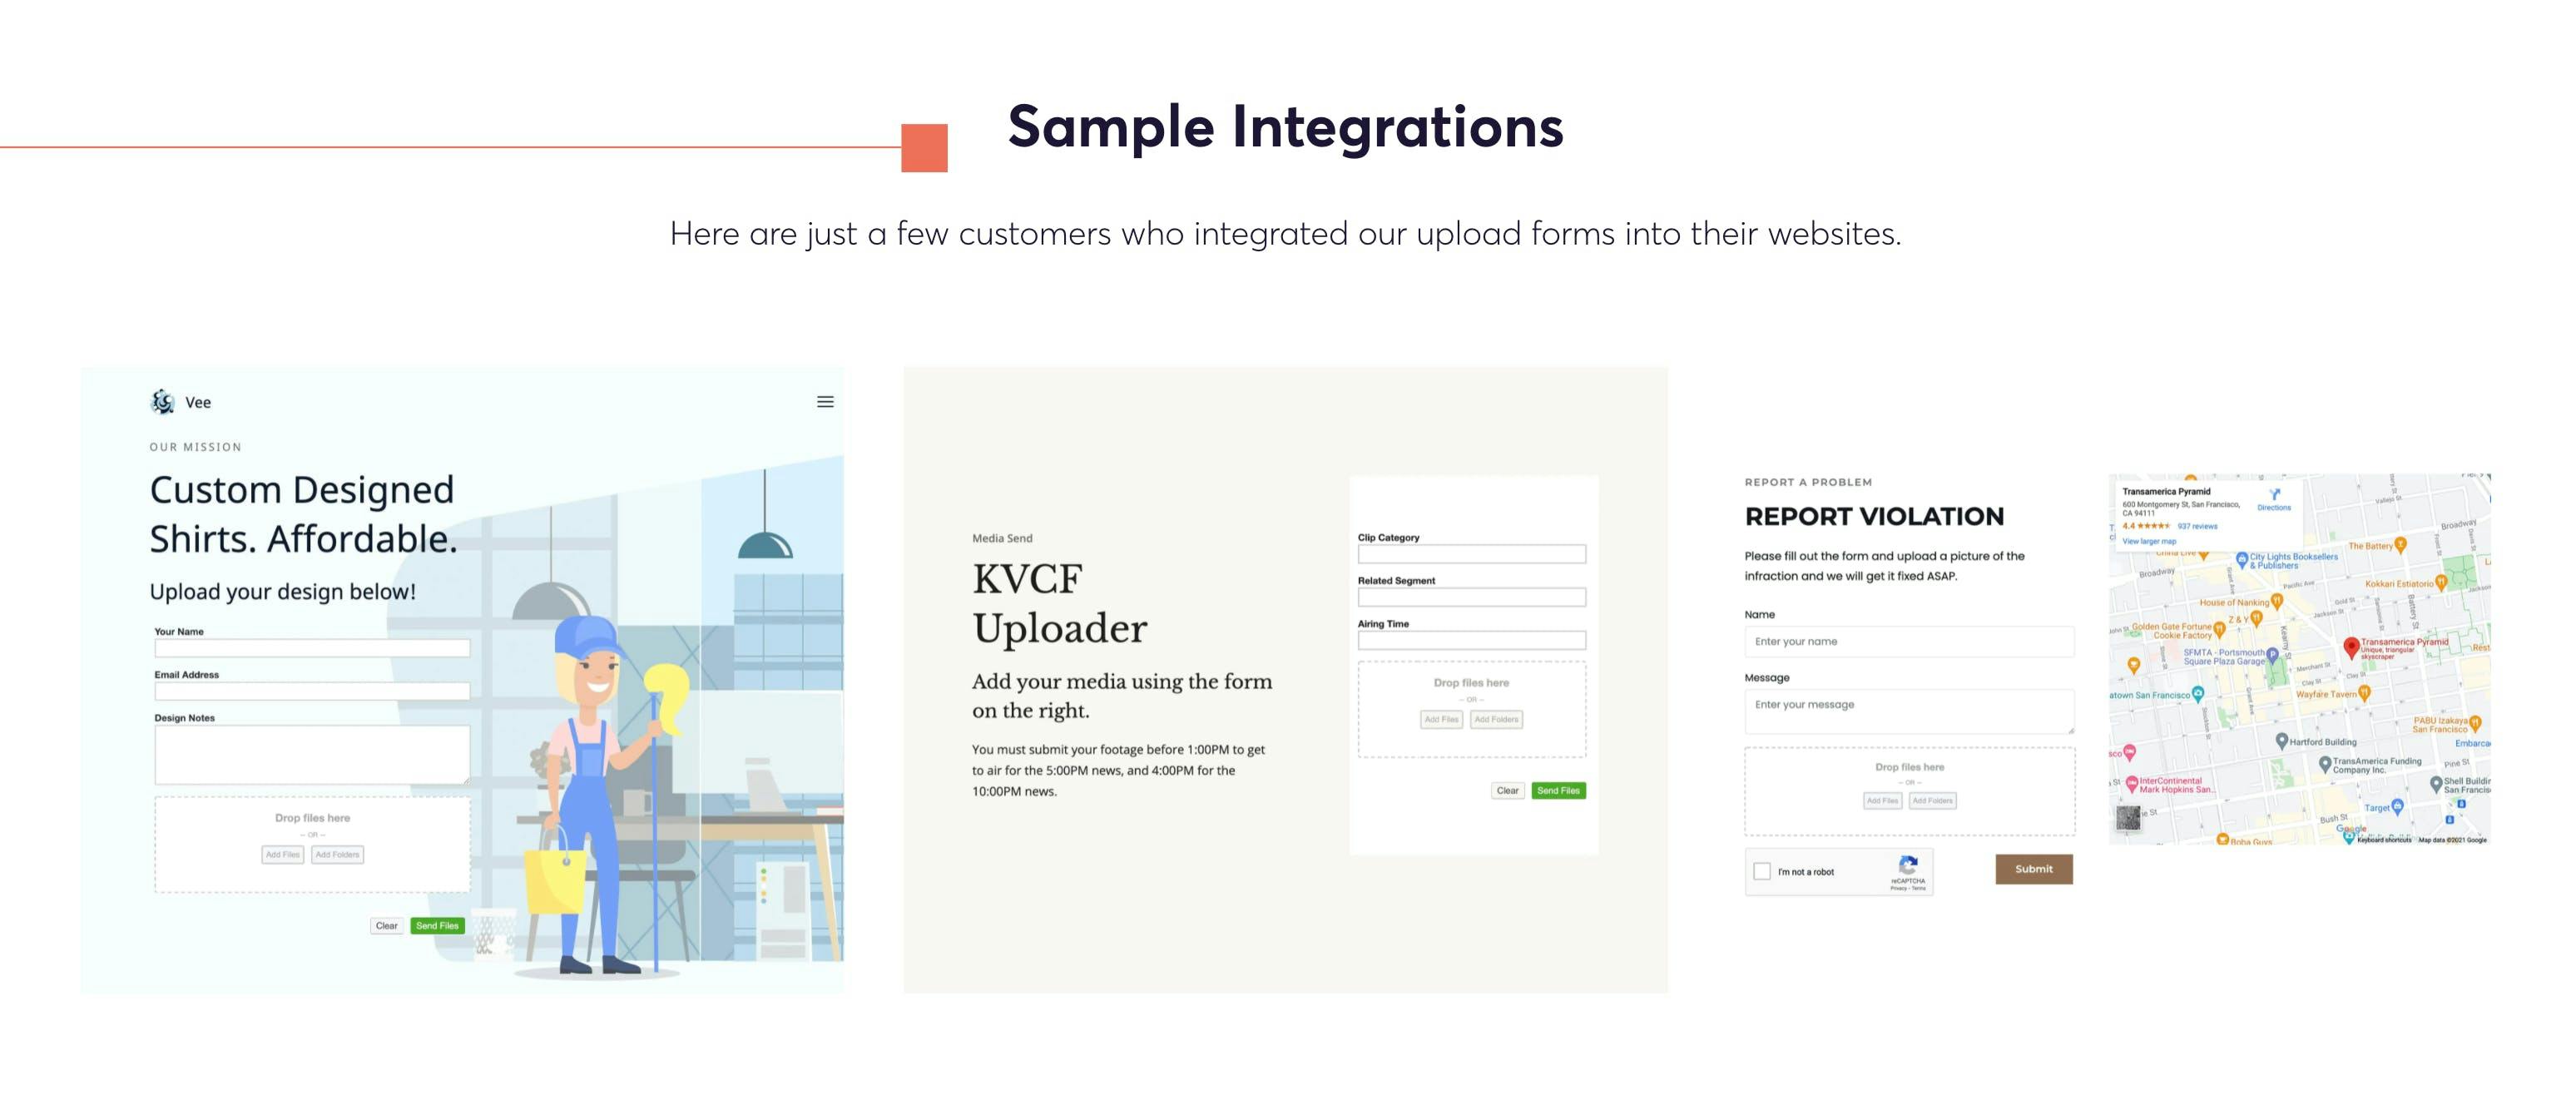 Sample integrations showing a few customers who integrated our upload forms into their websites.